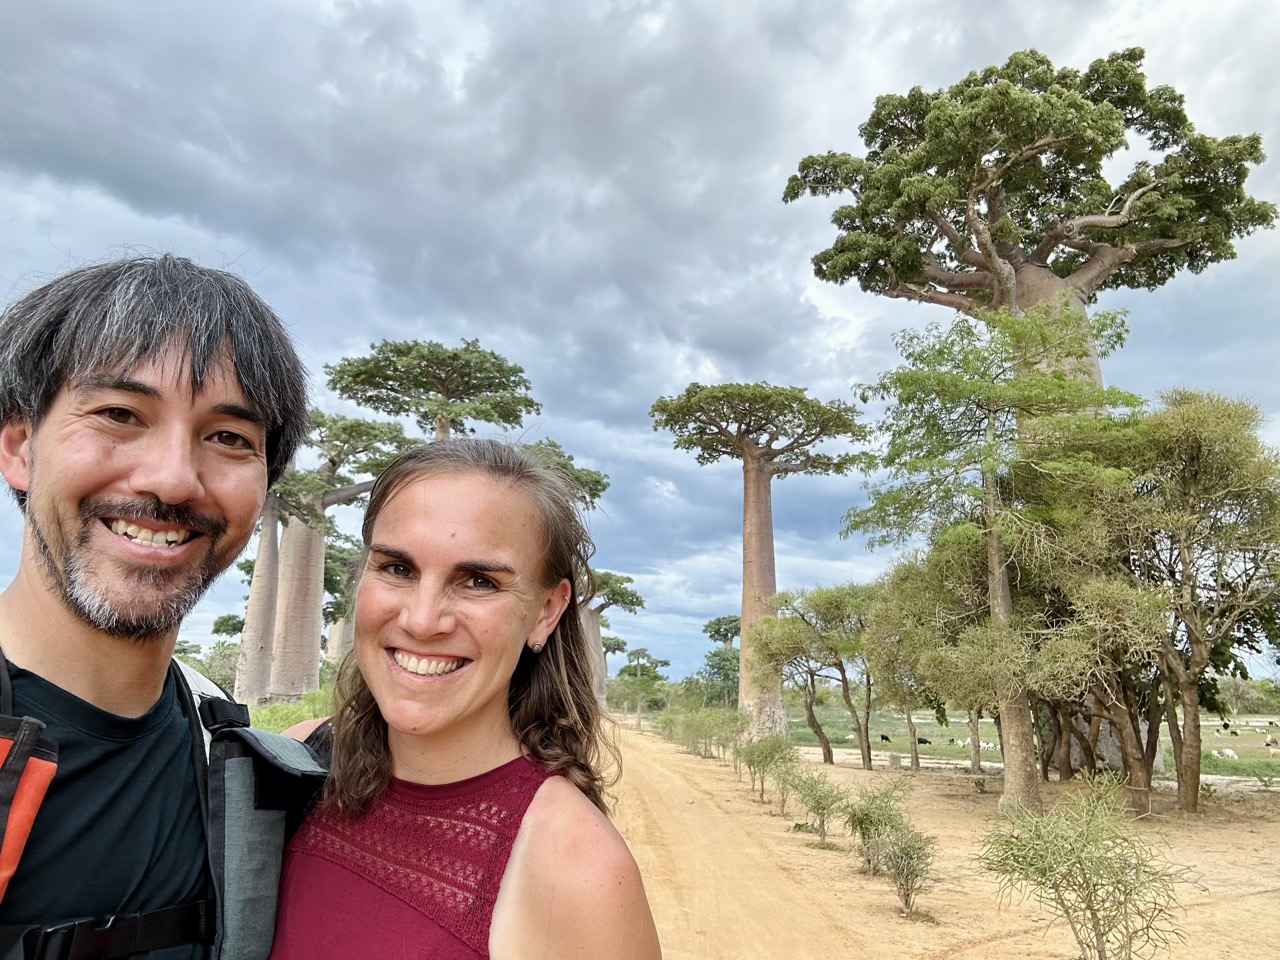 Cara and me at the Avenue of the Baobabs